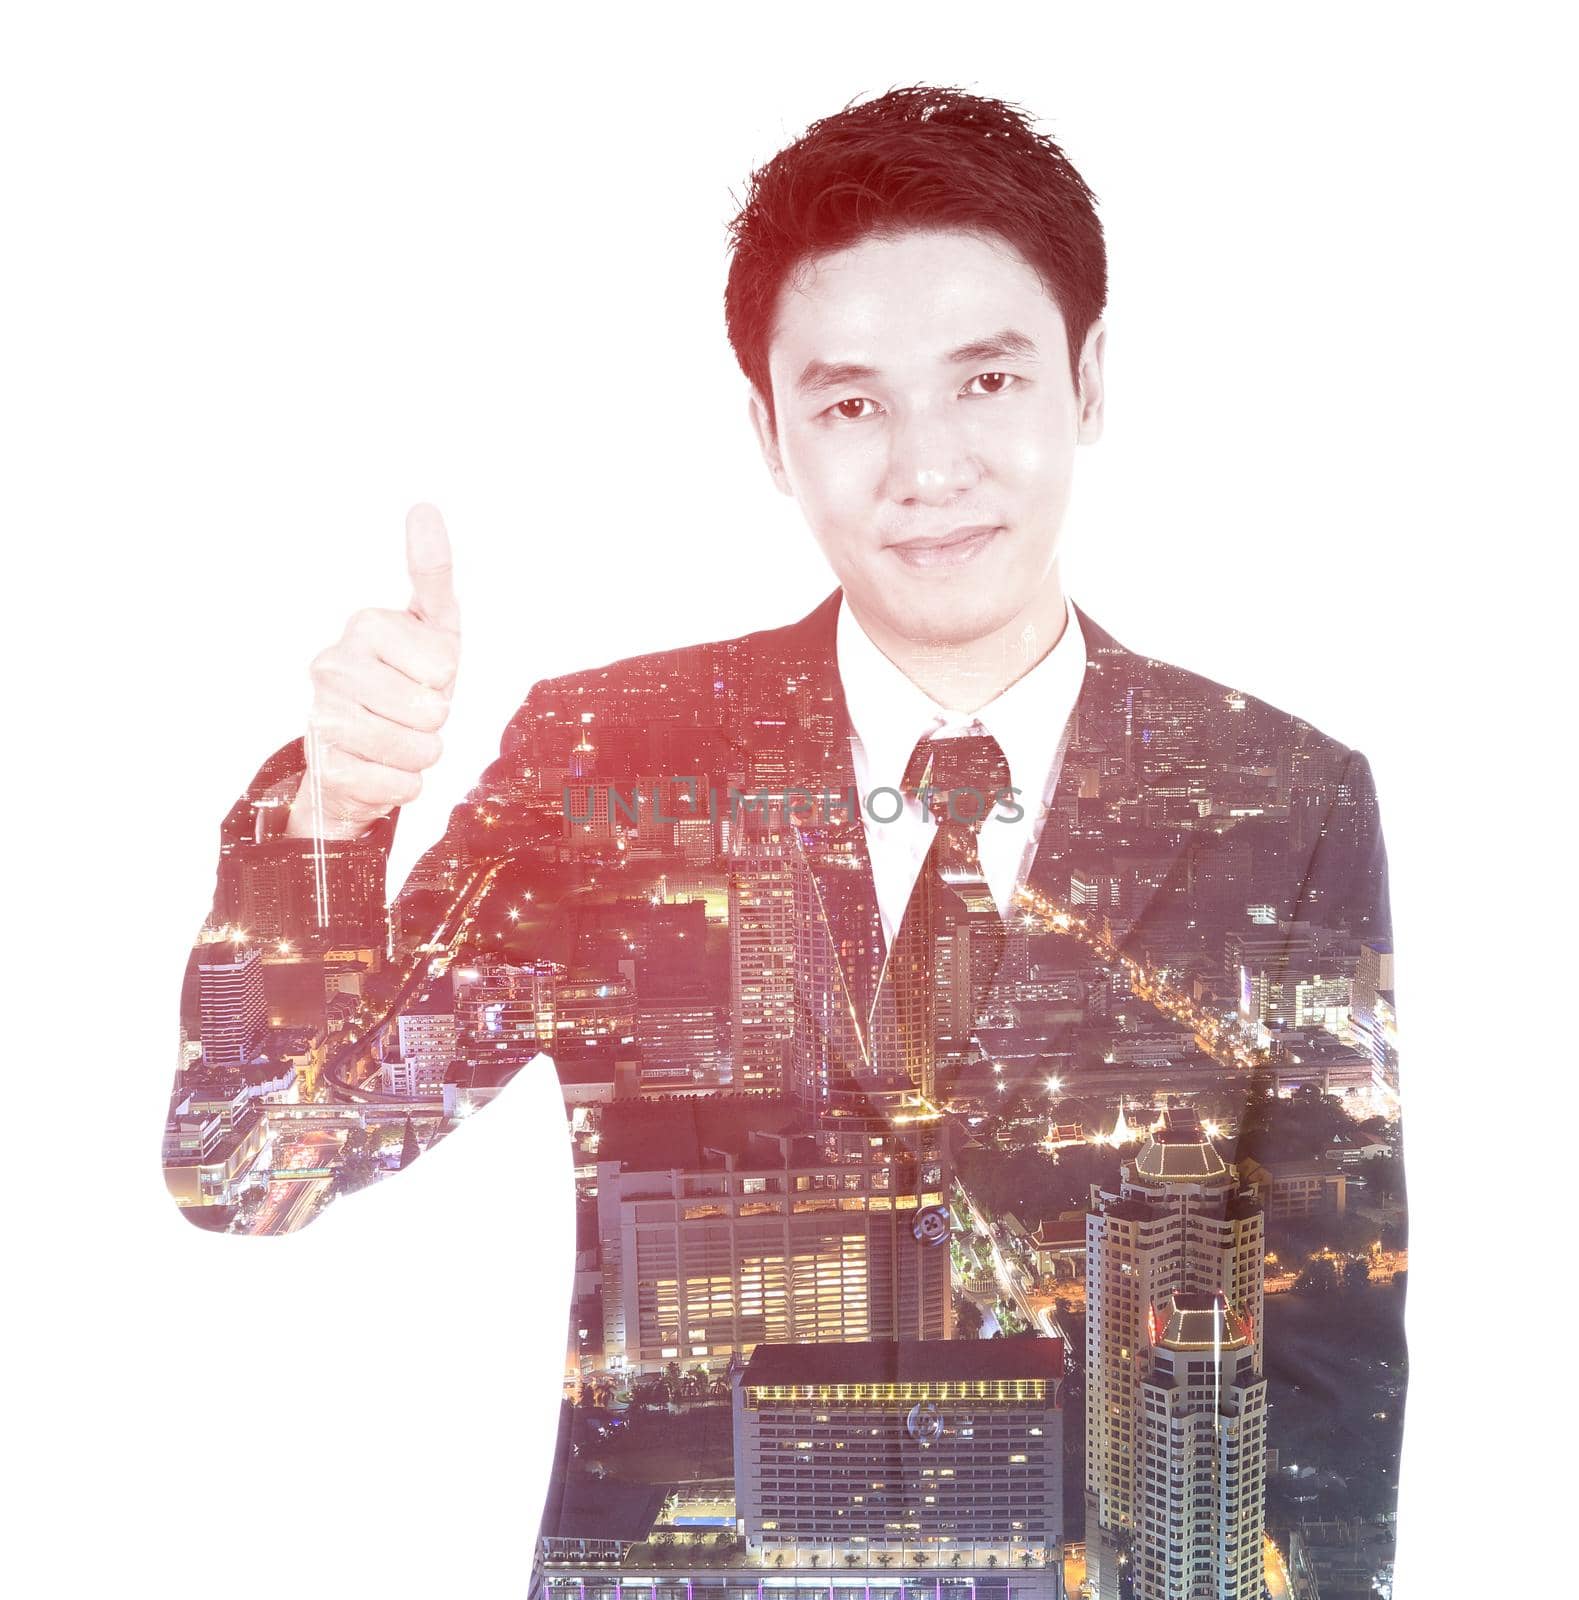 Double exposure of business man showing thumbs up gesture against city isolated on white background by geargodz